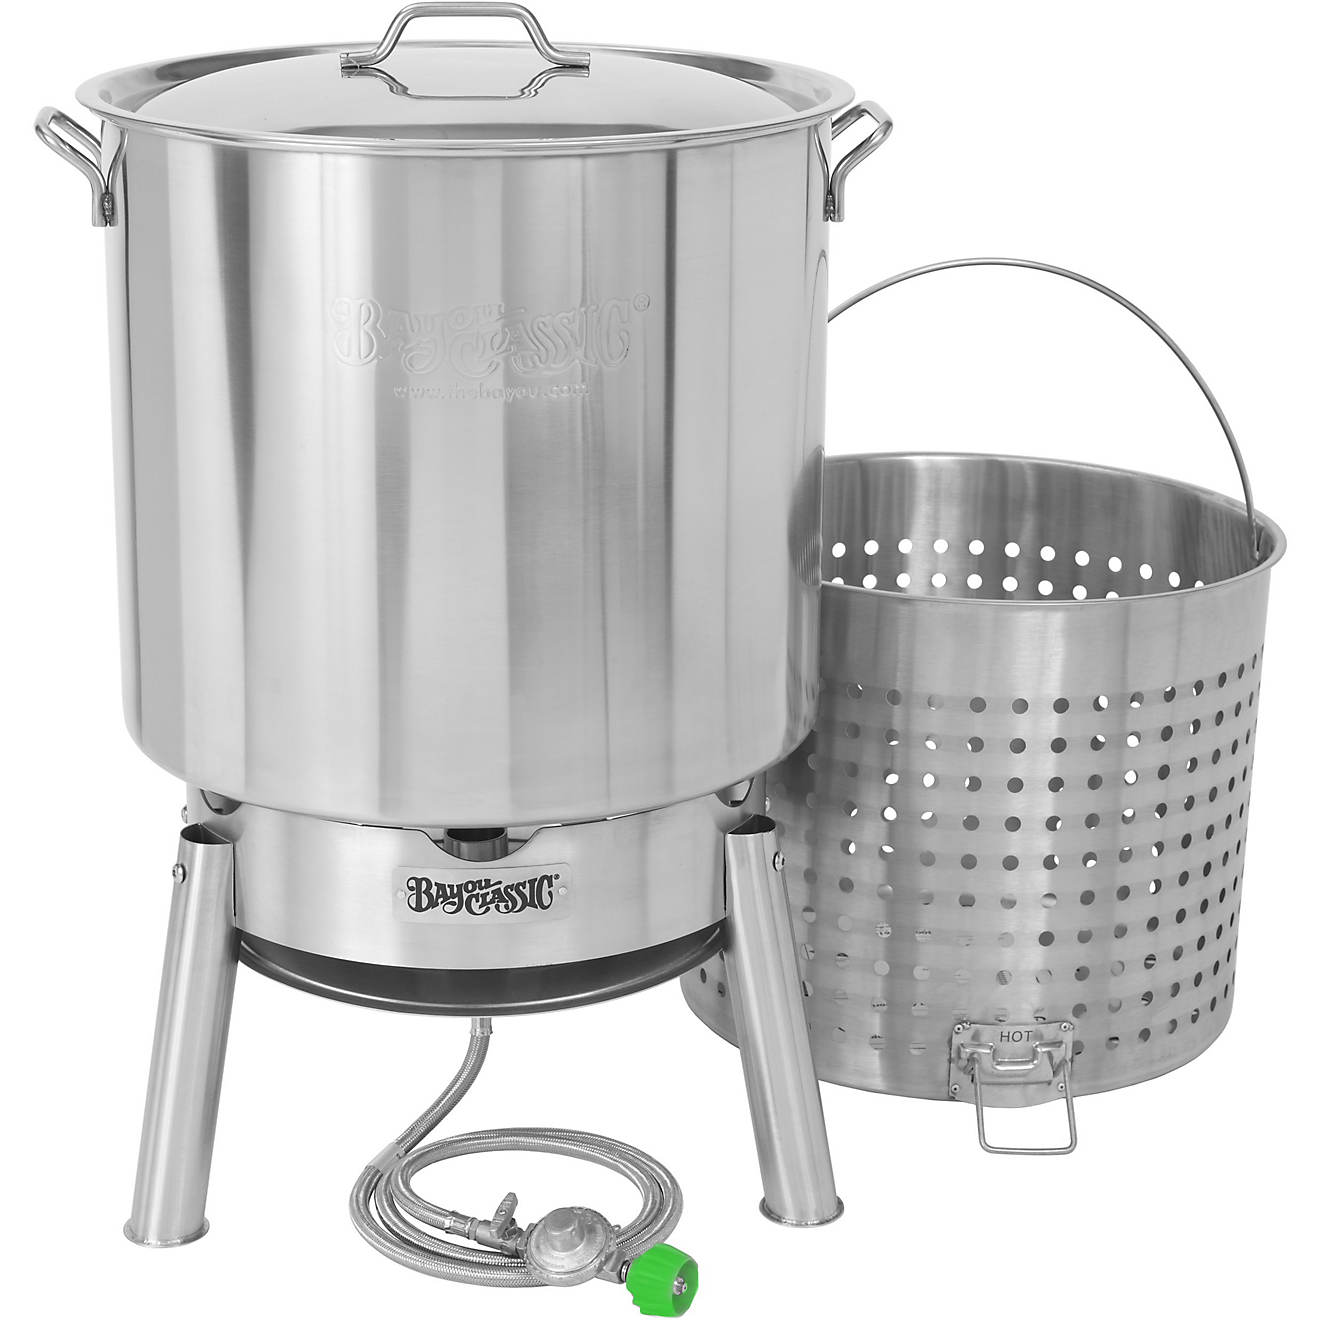 Trendy style Bayou Classic 82 qt Stainless Bayou Boiler Cooker Kit